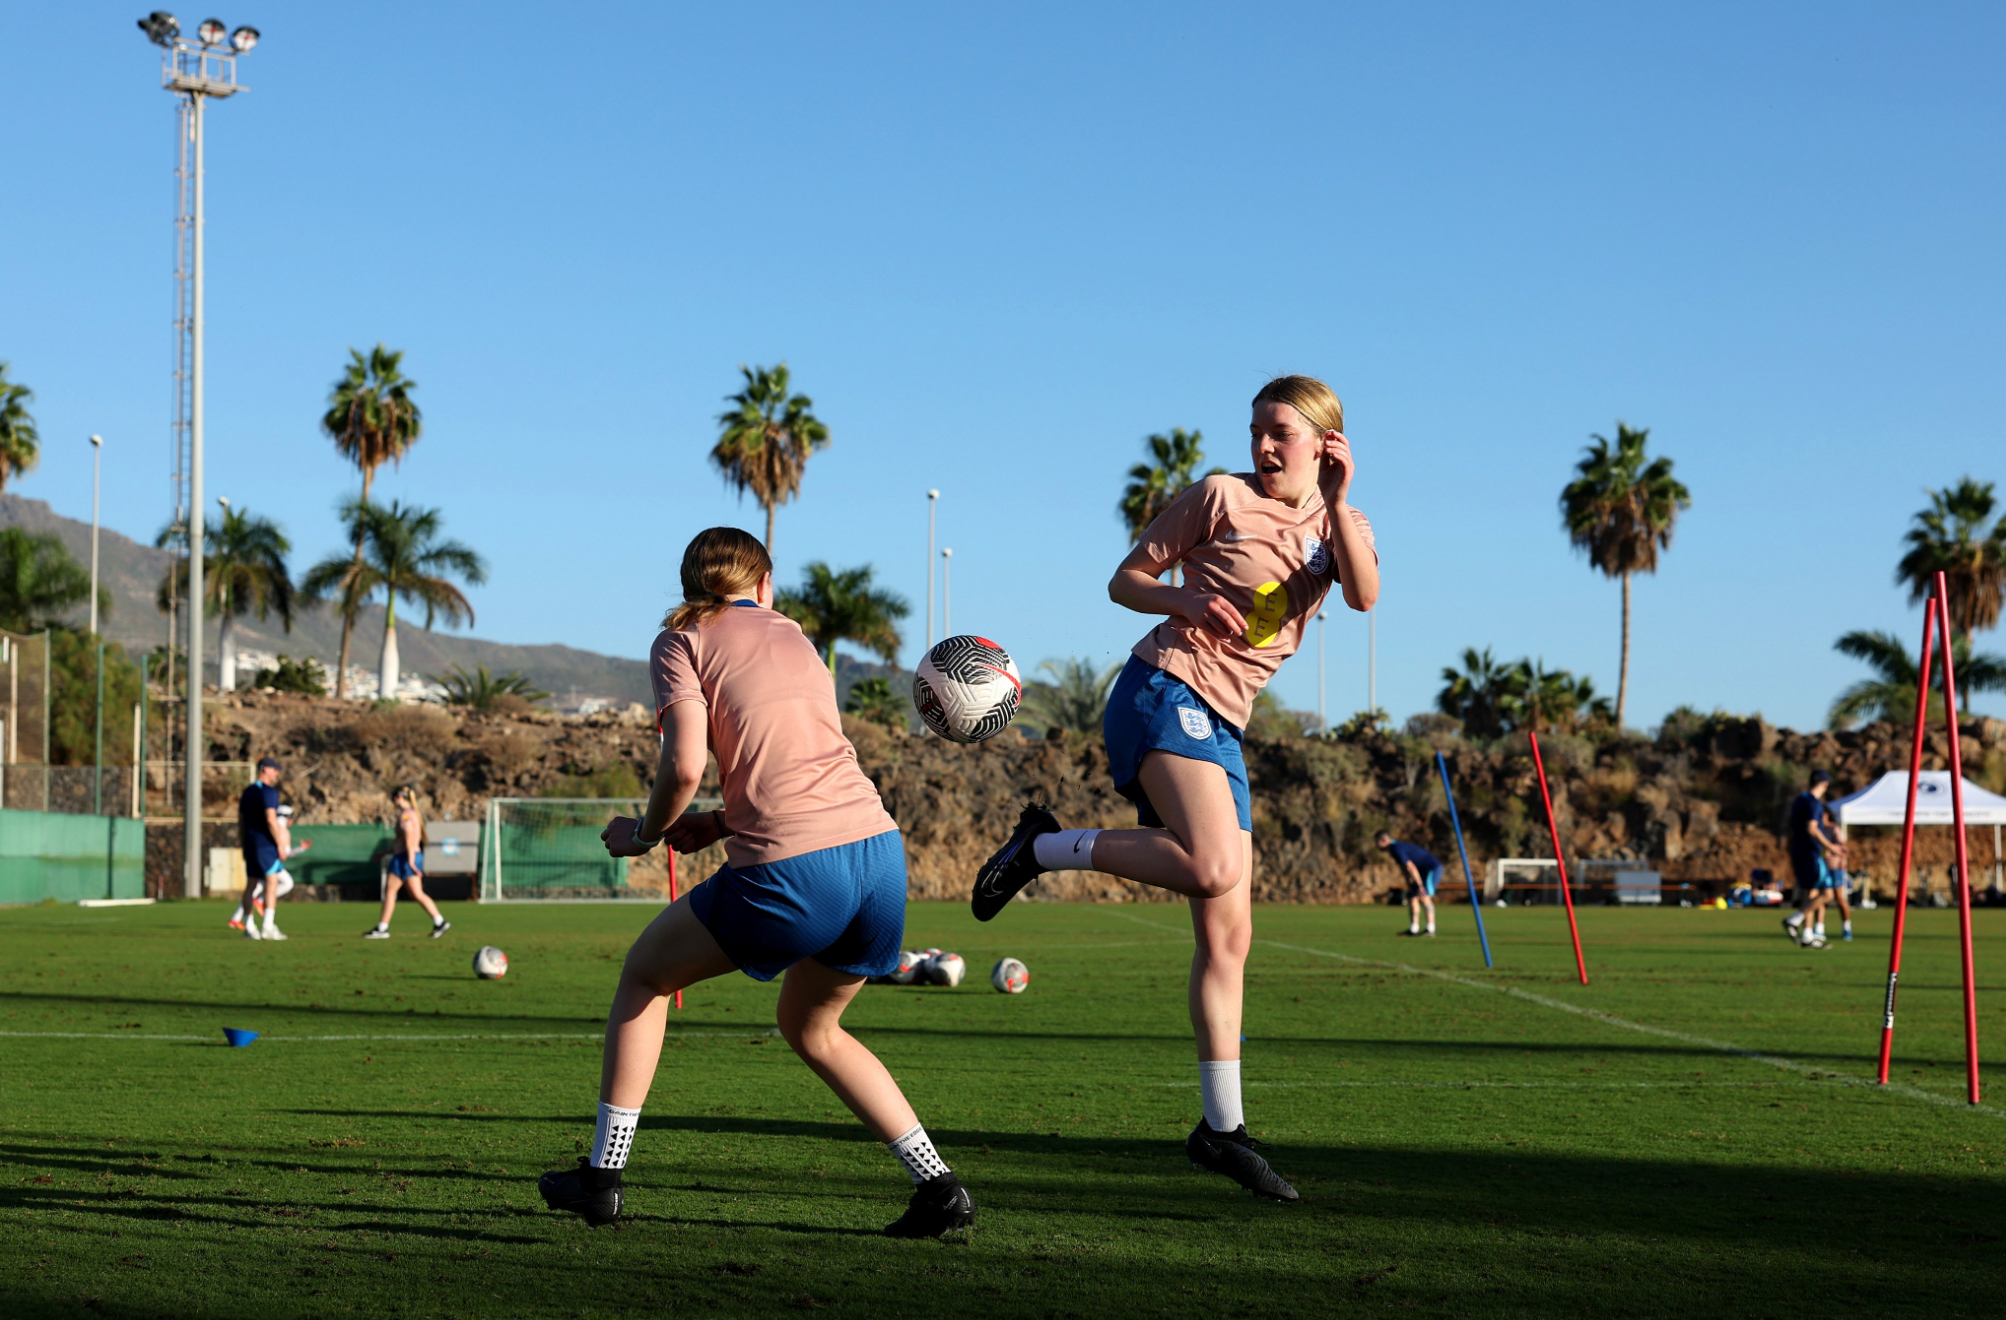 Faye, wearing pink England training kit, flicks the ball up on a grass pitch. It is sunny and there are palm trees in the background.